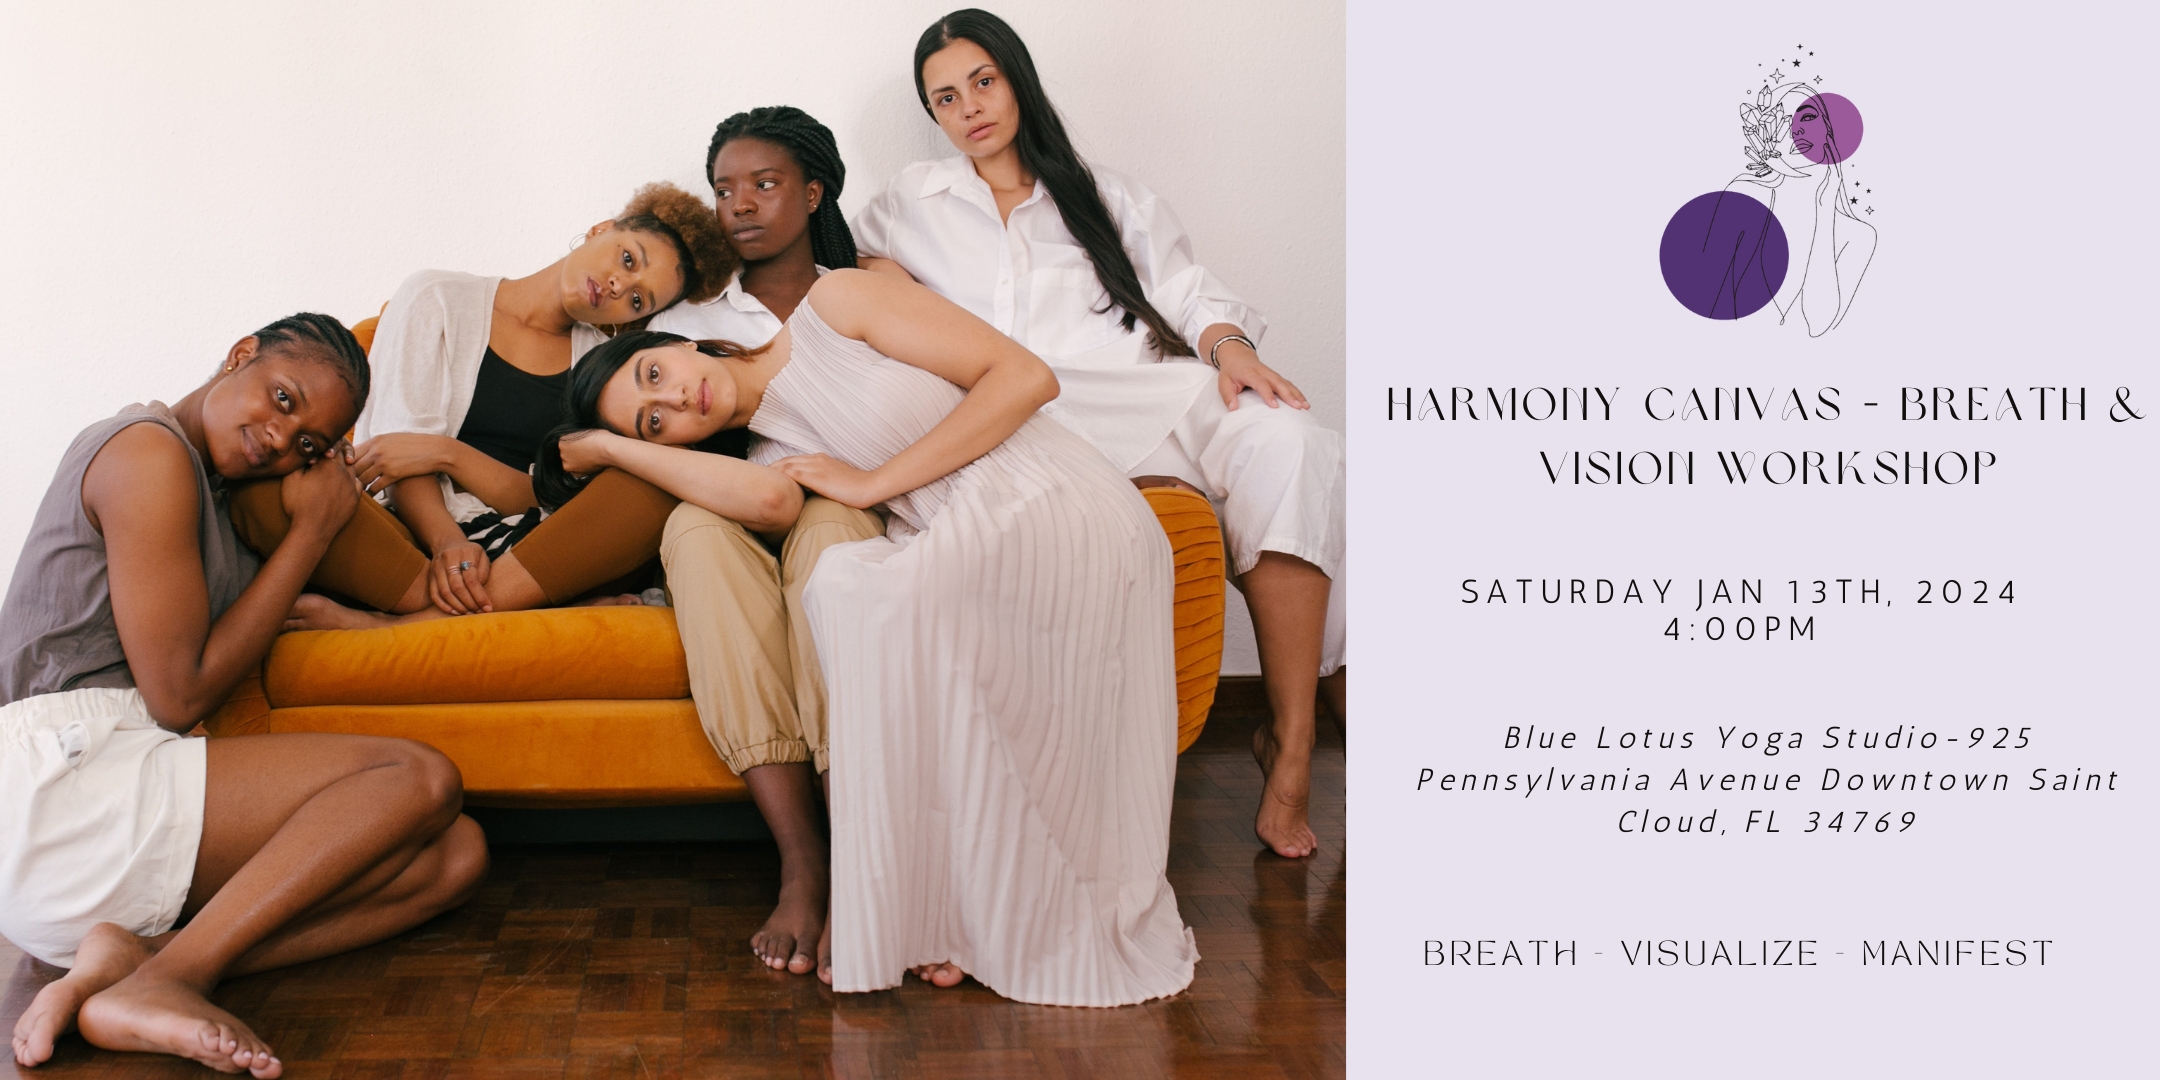 Harmony Canvas - Breath & Vision Workshop cover image